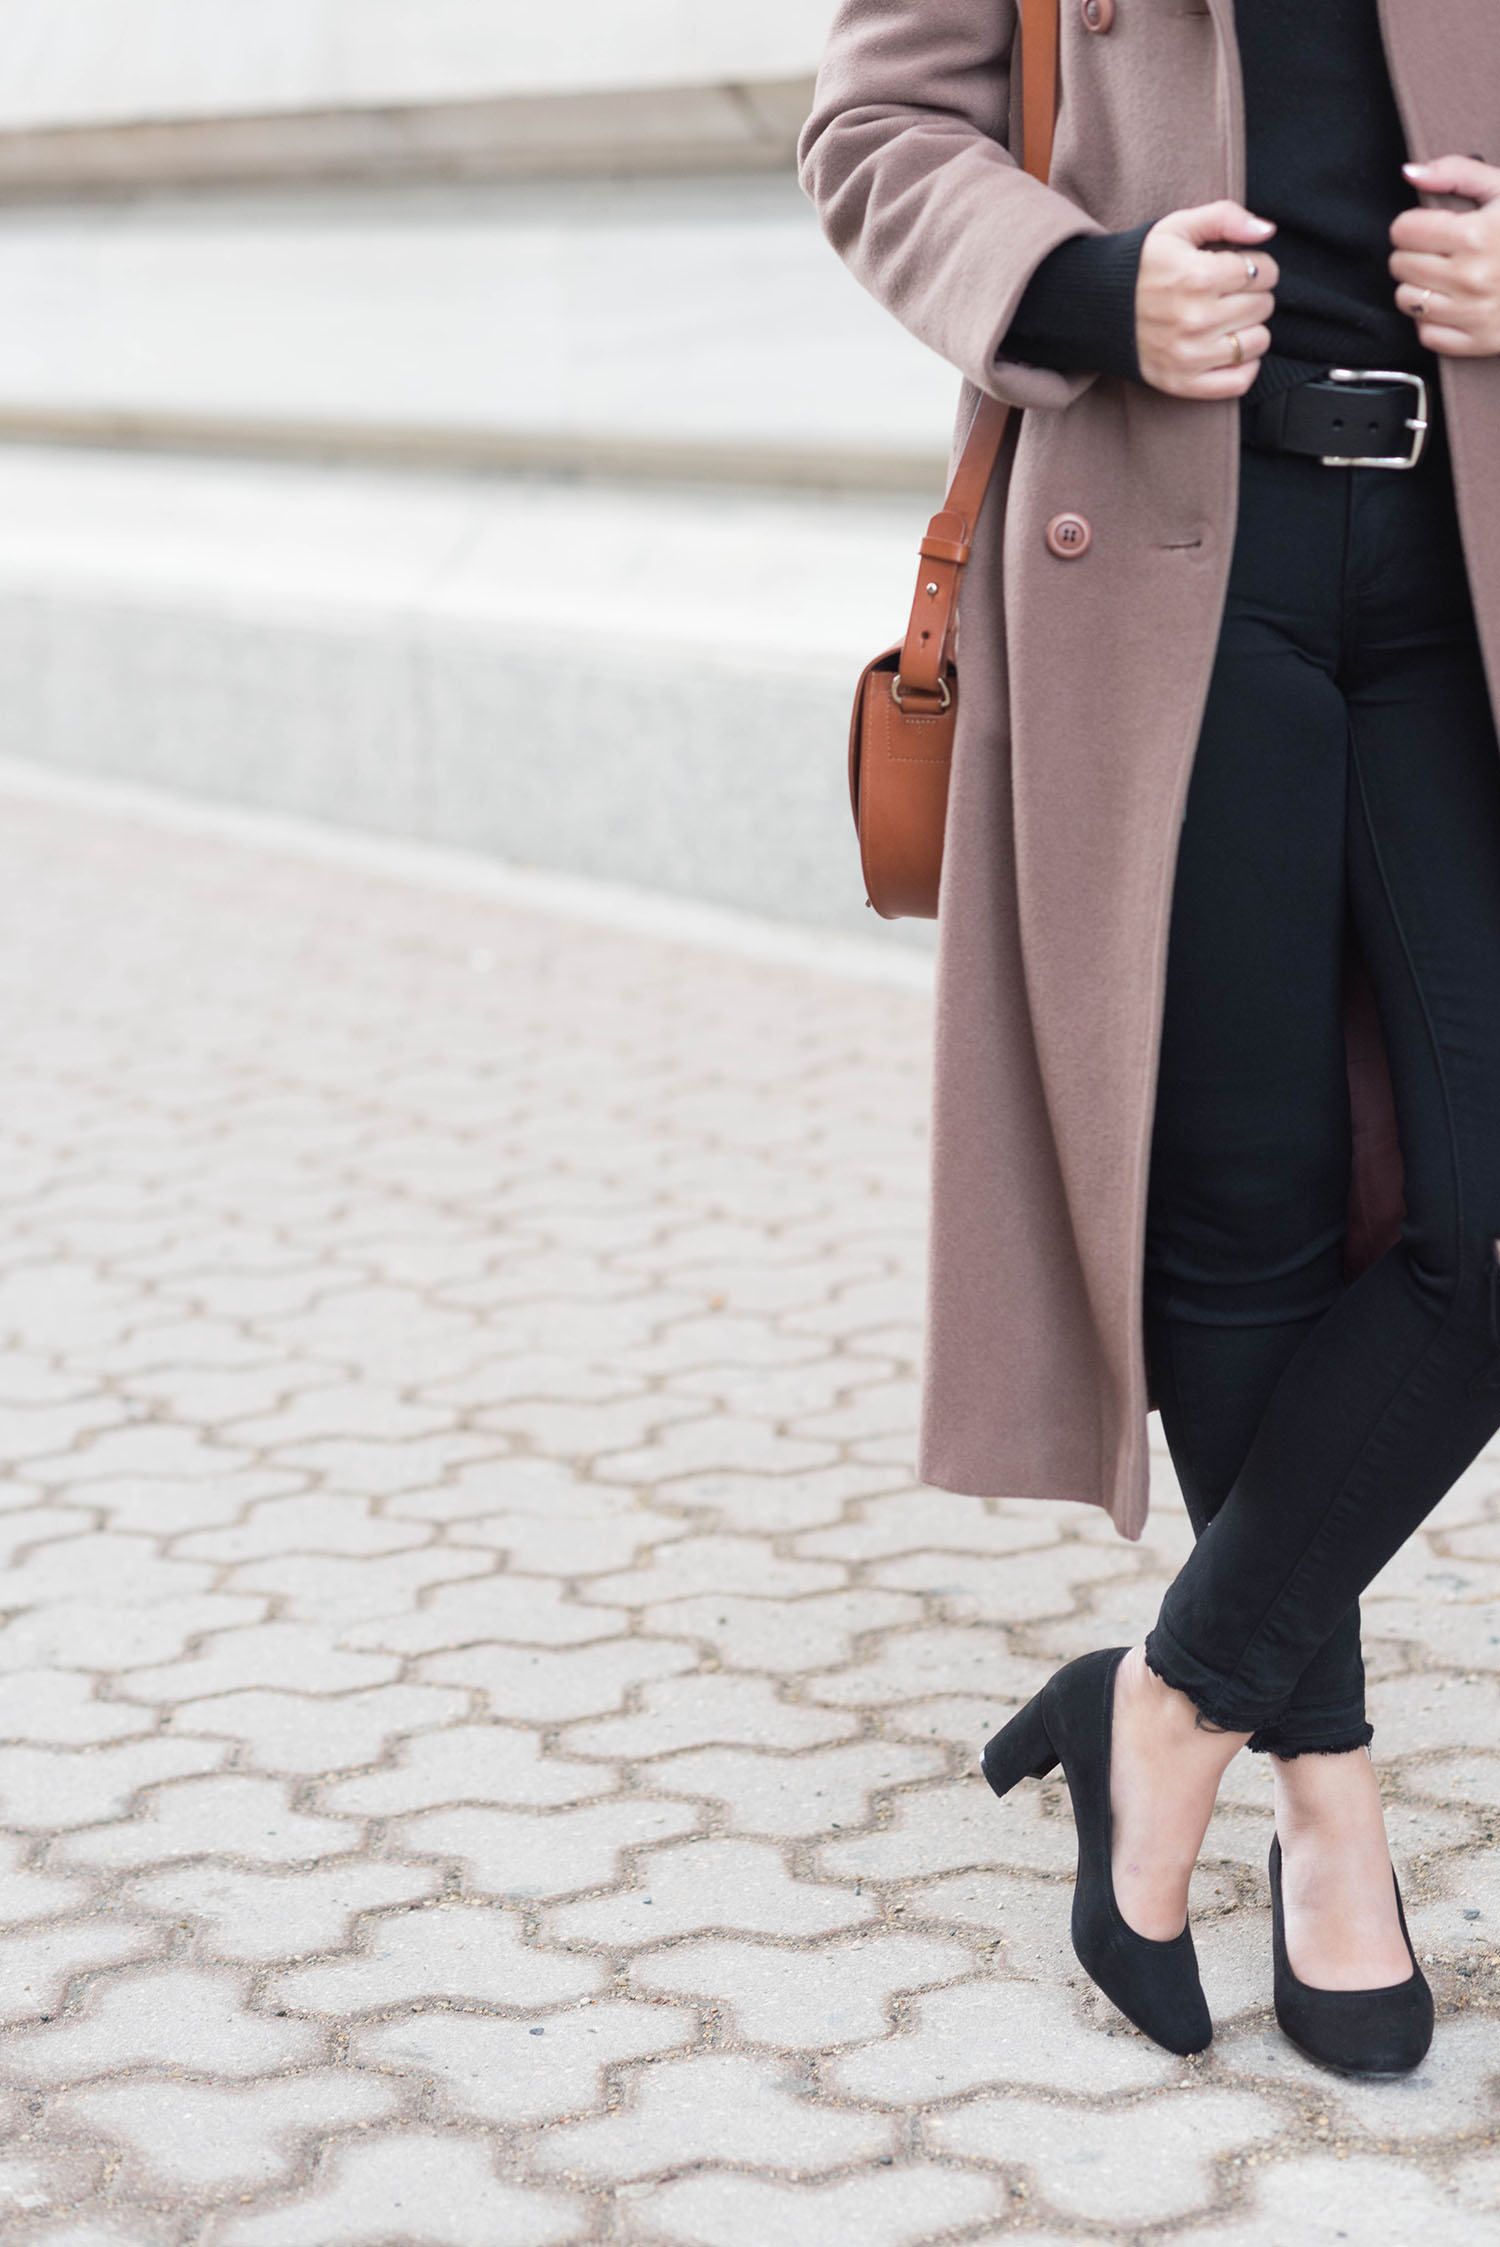 Outfit details on Canadian fashion blogger Cee Fardoe of Coco & Vera, wearing a BRAVE Leather belt and Paige black jeans